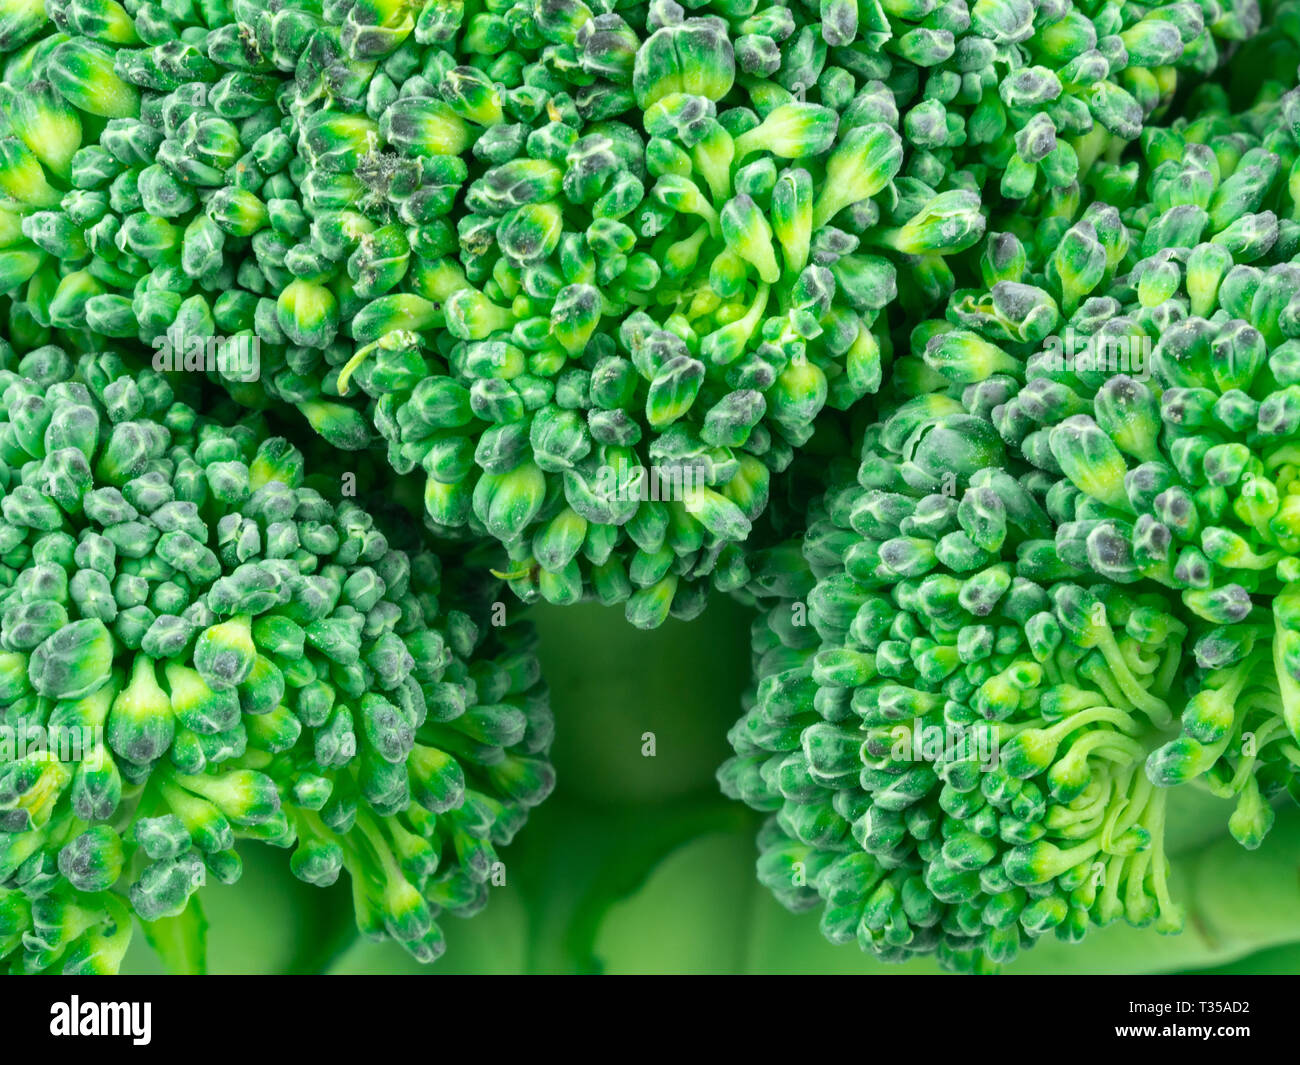 Closeup of a broccoli floret. Green background with a floral motif. Stock Photo